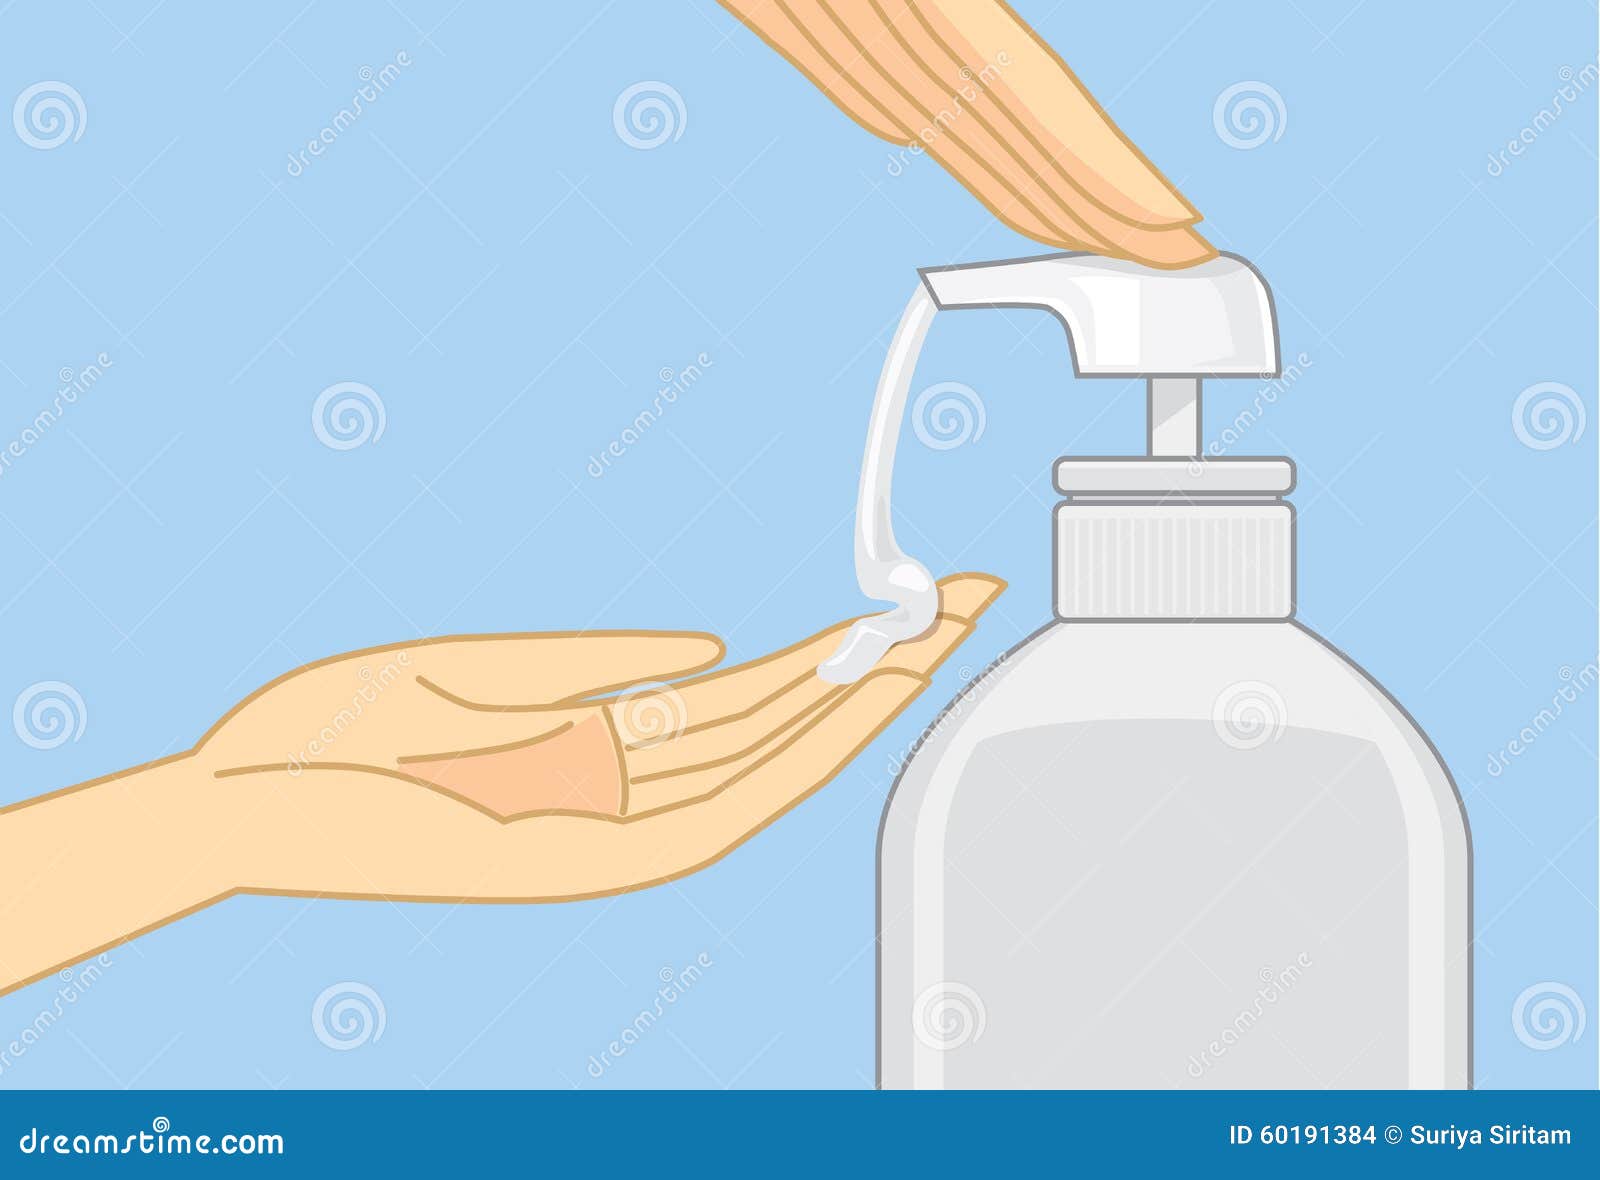 pump liquid soap came out from bottle